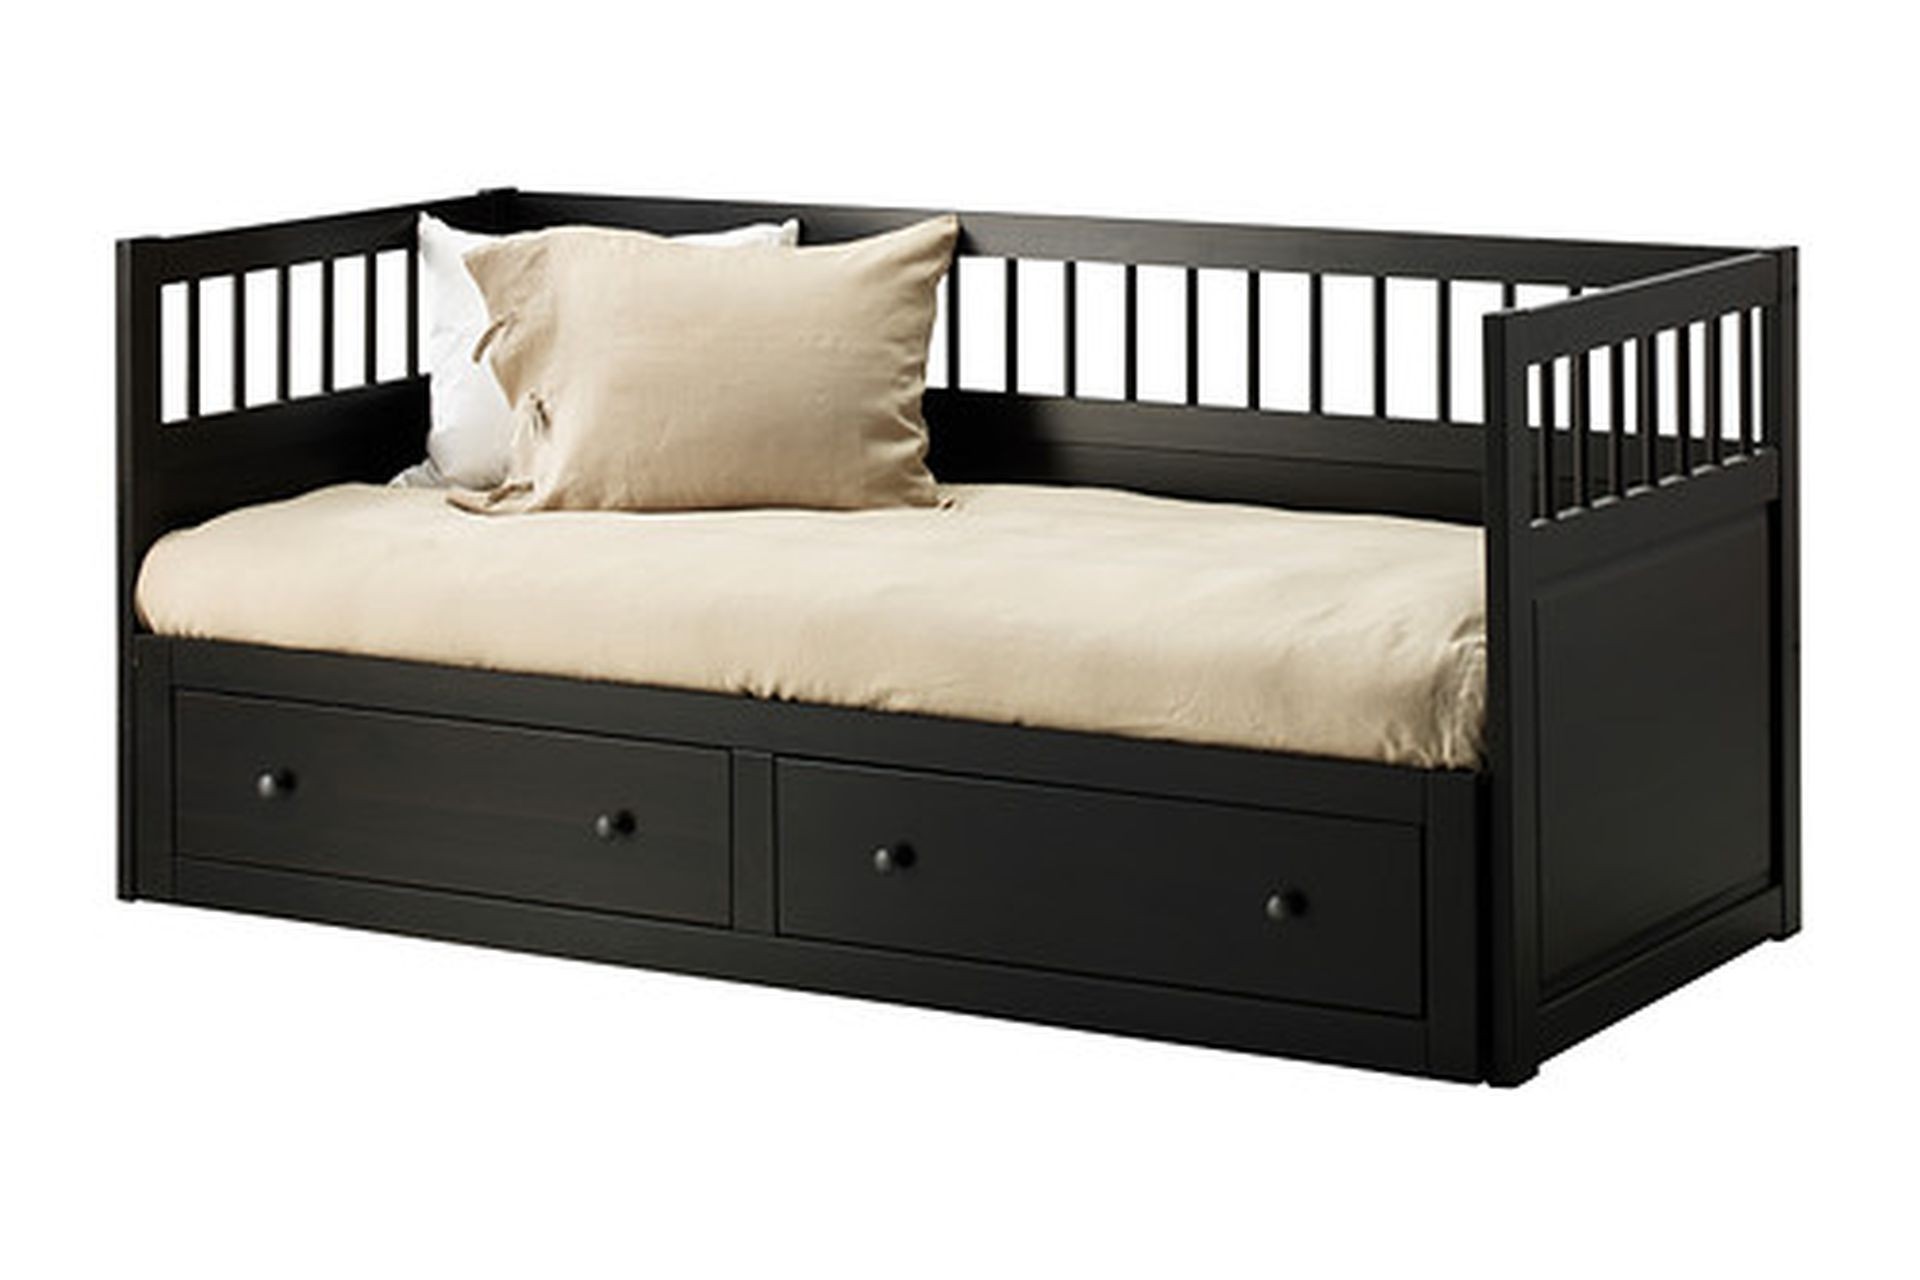 Cheap daybeds frames